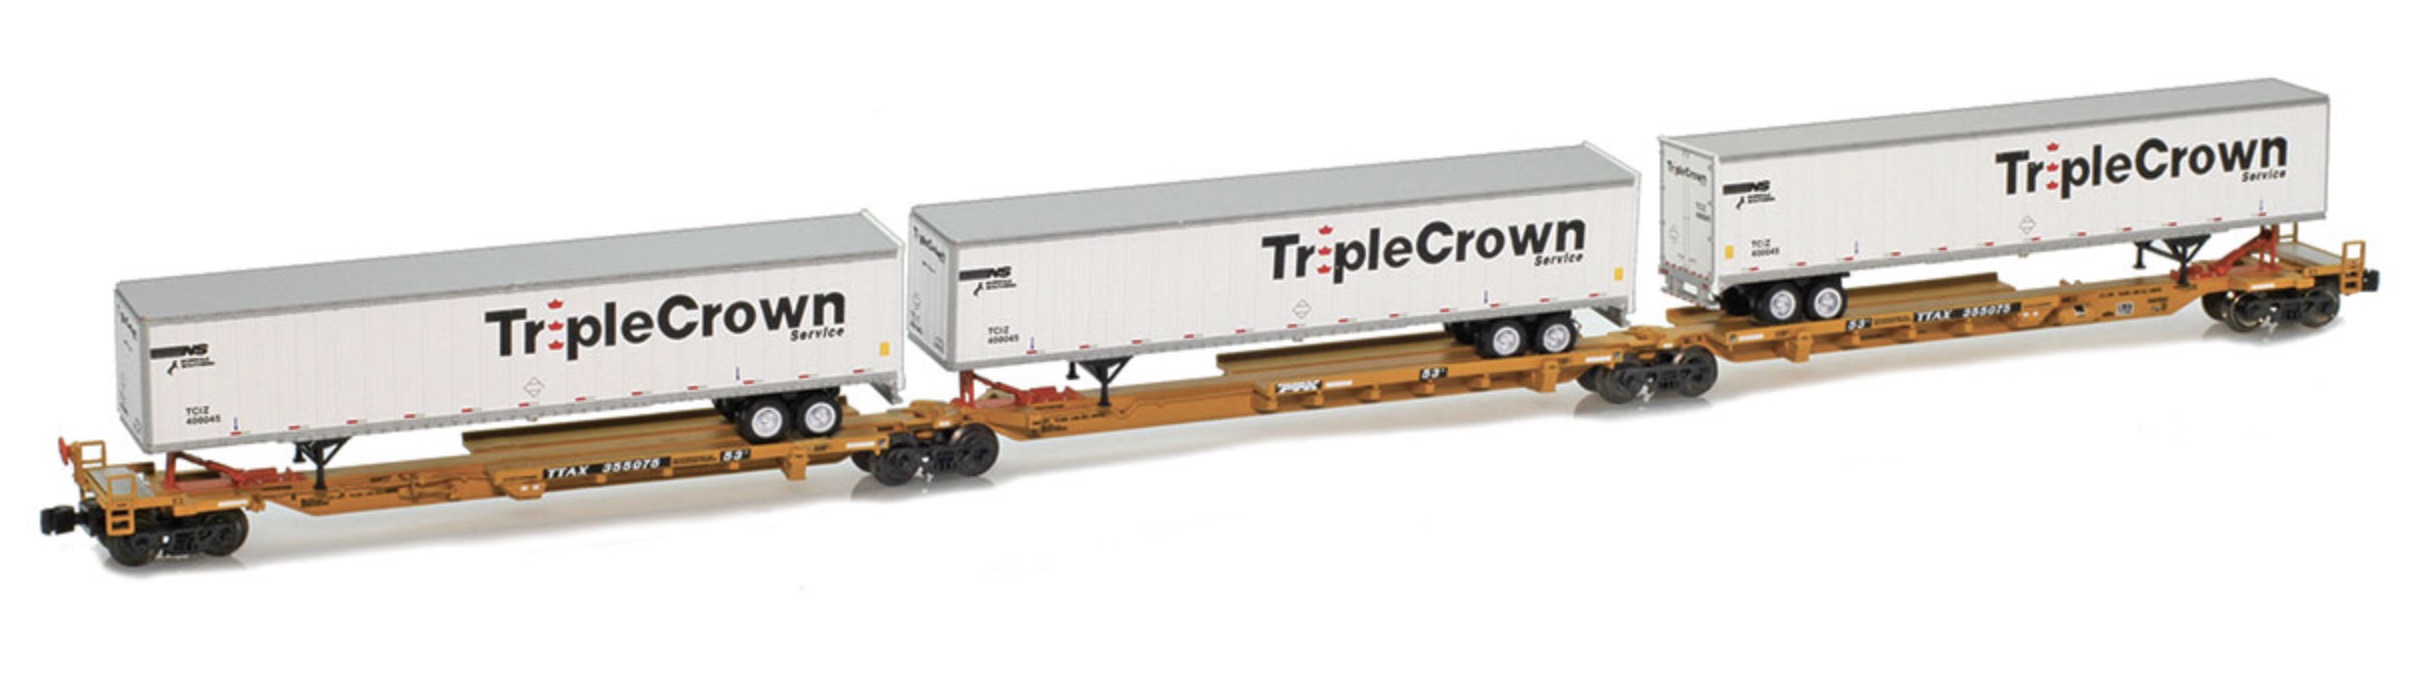 Z Scale - AZL - 905232-1 - Articulated Well, Trinity RAF 53-Foot Spine - TTX Company - 355075